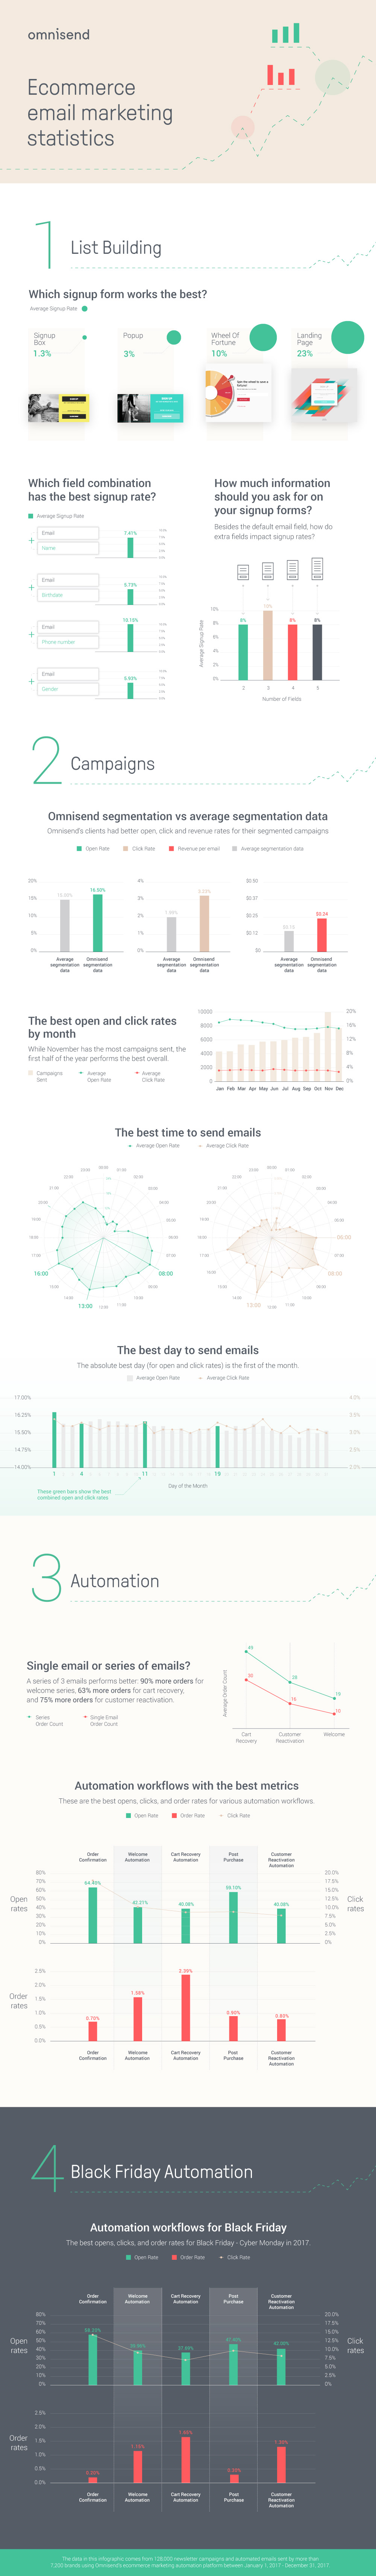 Ecommerce Email Marketing Statistics for 2018 [Infographic]